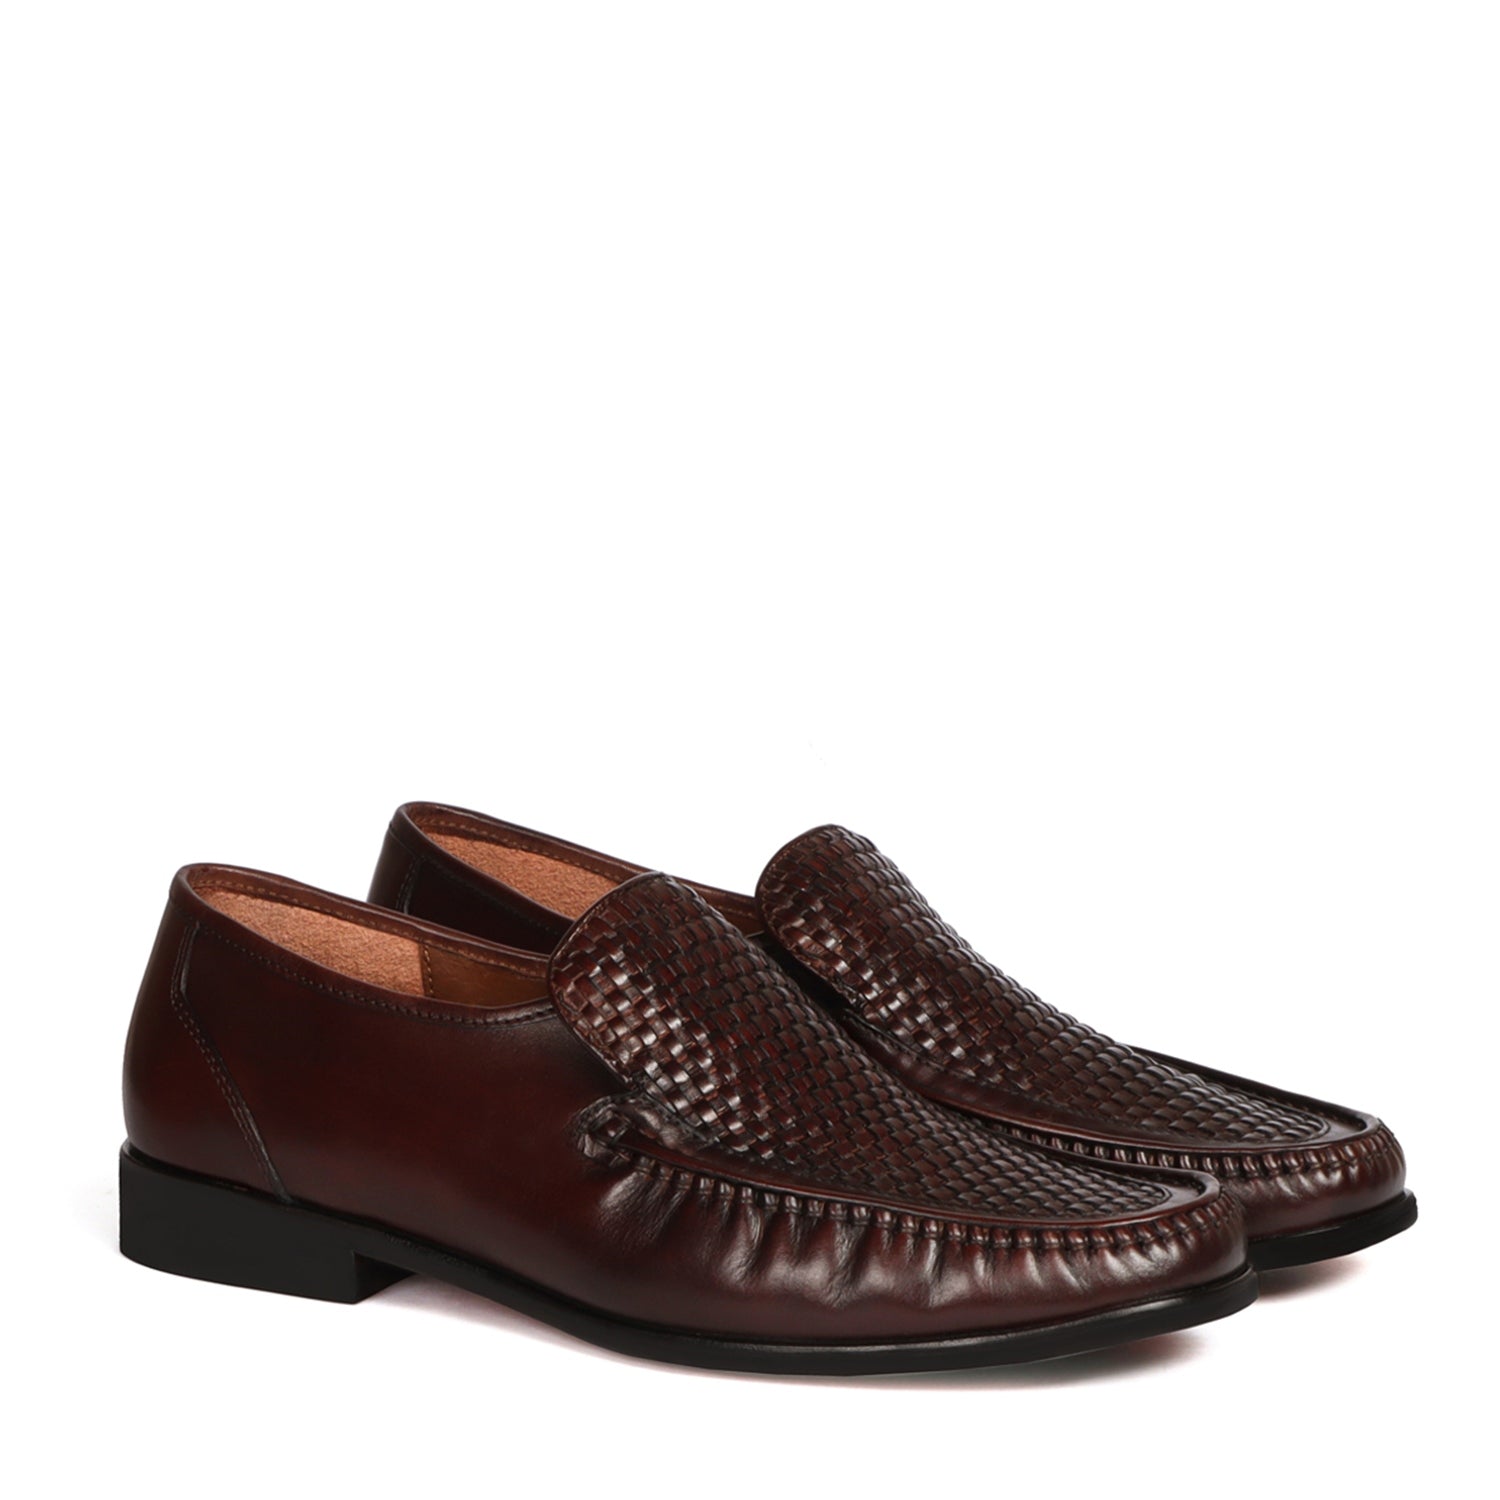 Weaved Vamp Leather Loafers in Dark Brown with Leather Sole